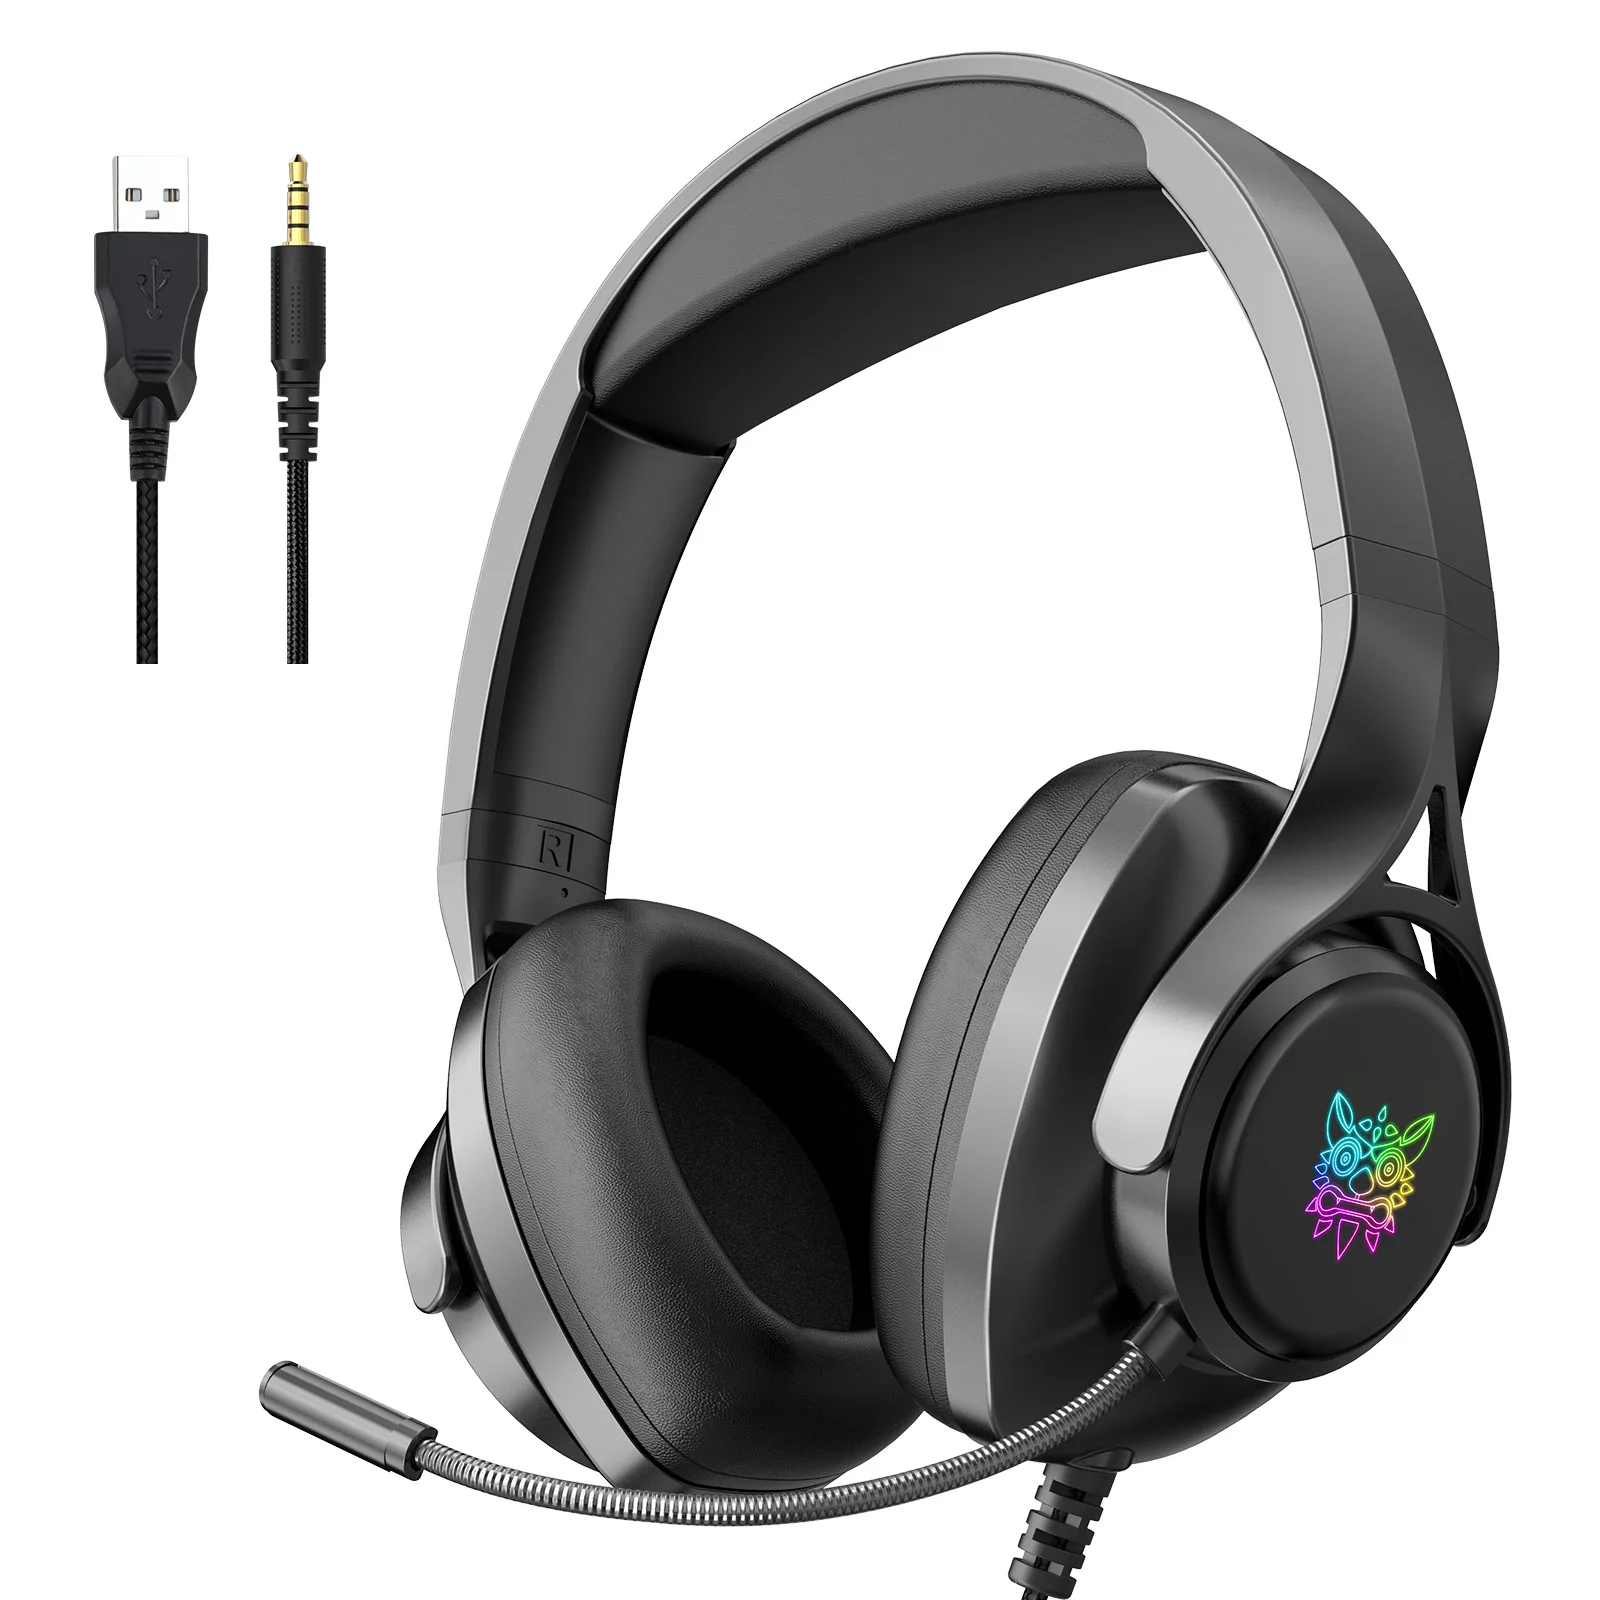 

ONIKUMA X16 Wired Headphone RGB Over-ear Gaming Headset Surround Sound Stereo Headsets with Noise Cancelling Mic for PC PS4 Xbox